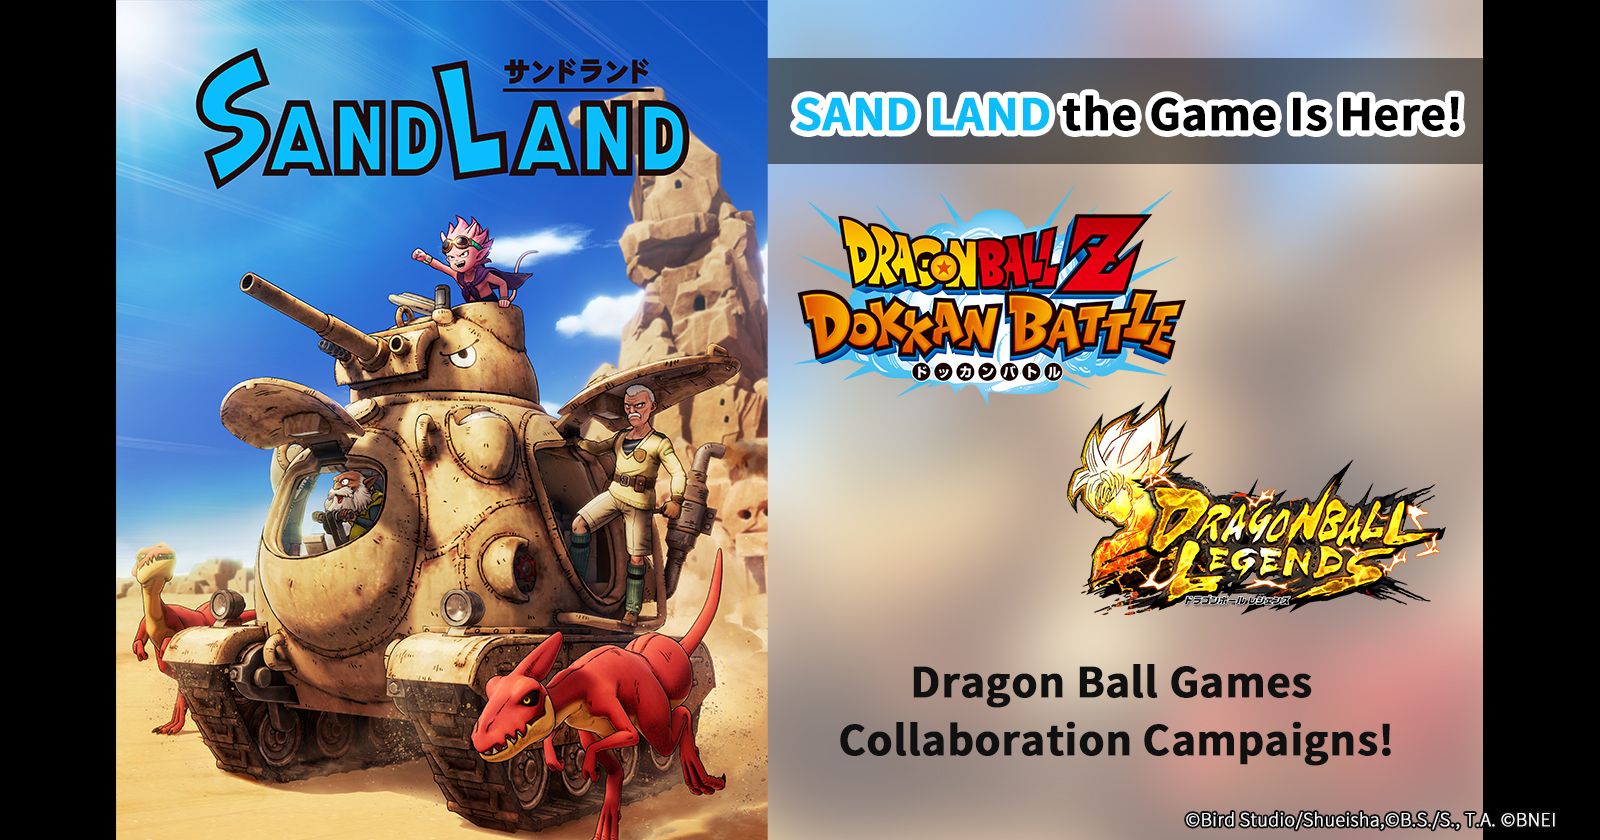 SAND LAND the Game Released Today! Dragon Ball Games Collaboration Campaigns On Now!